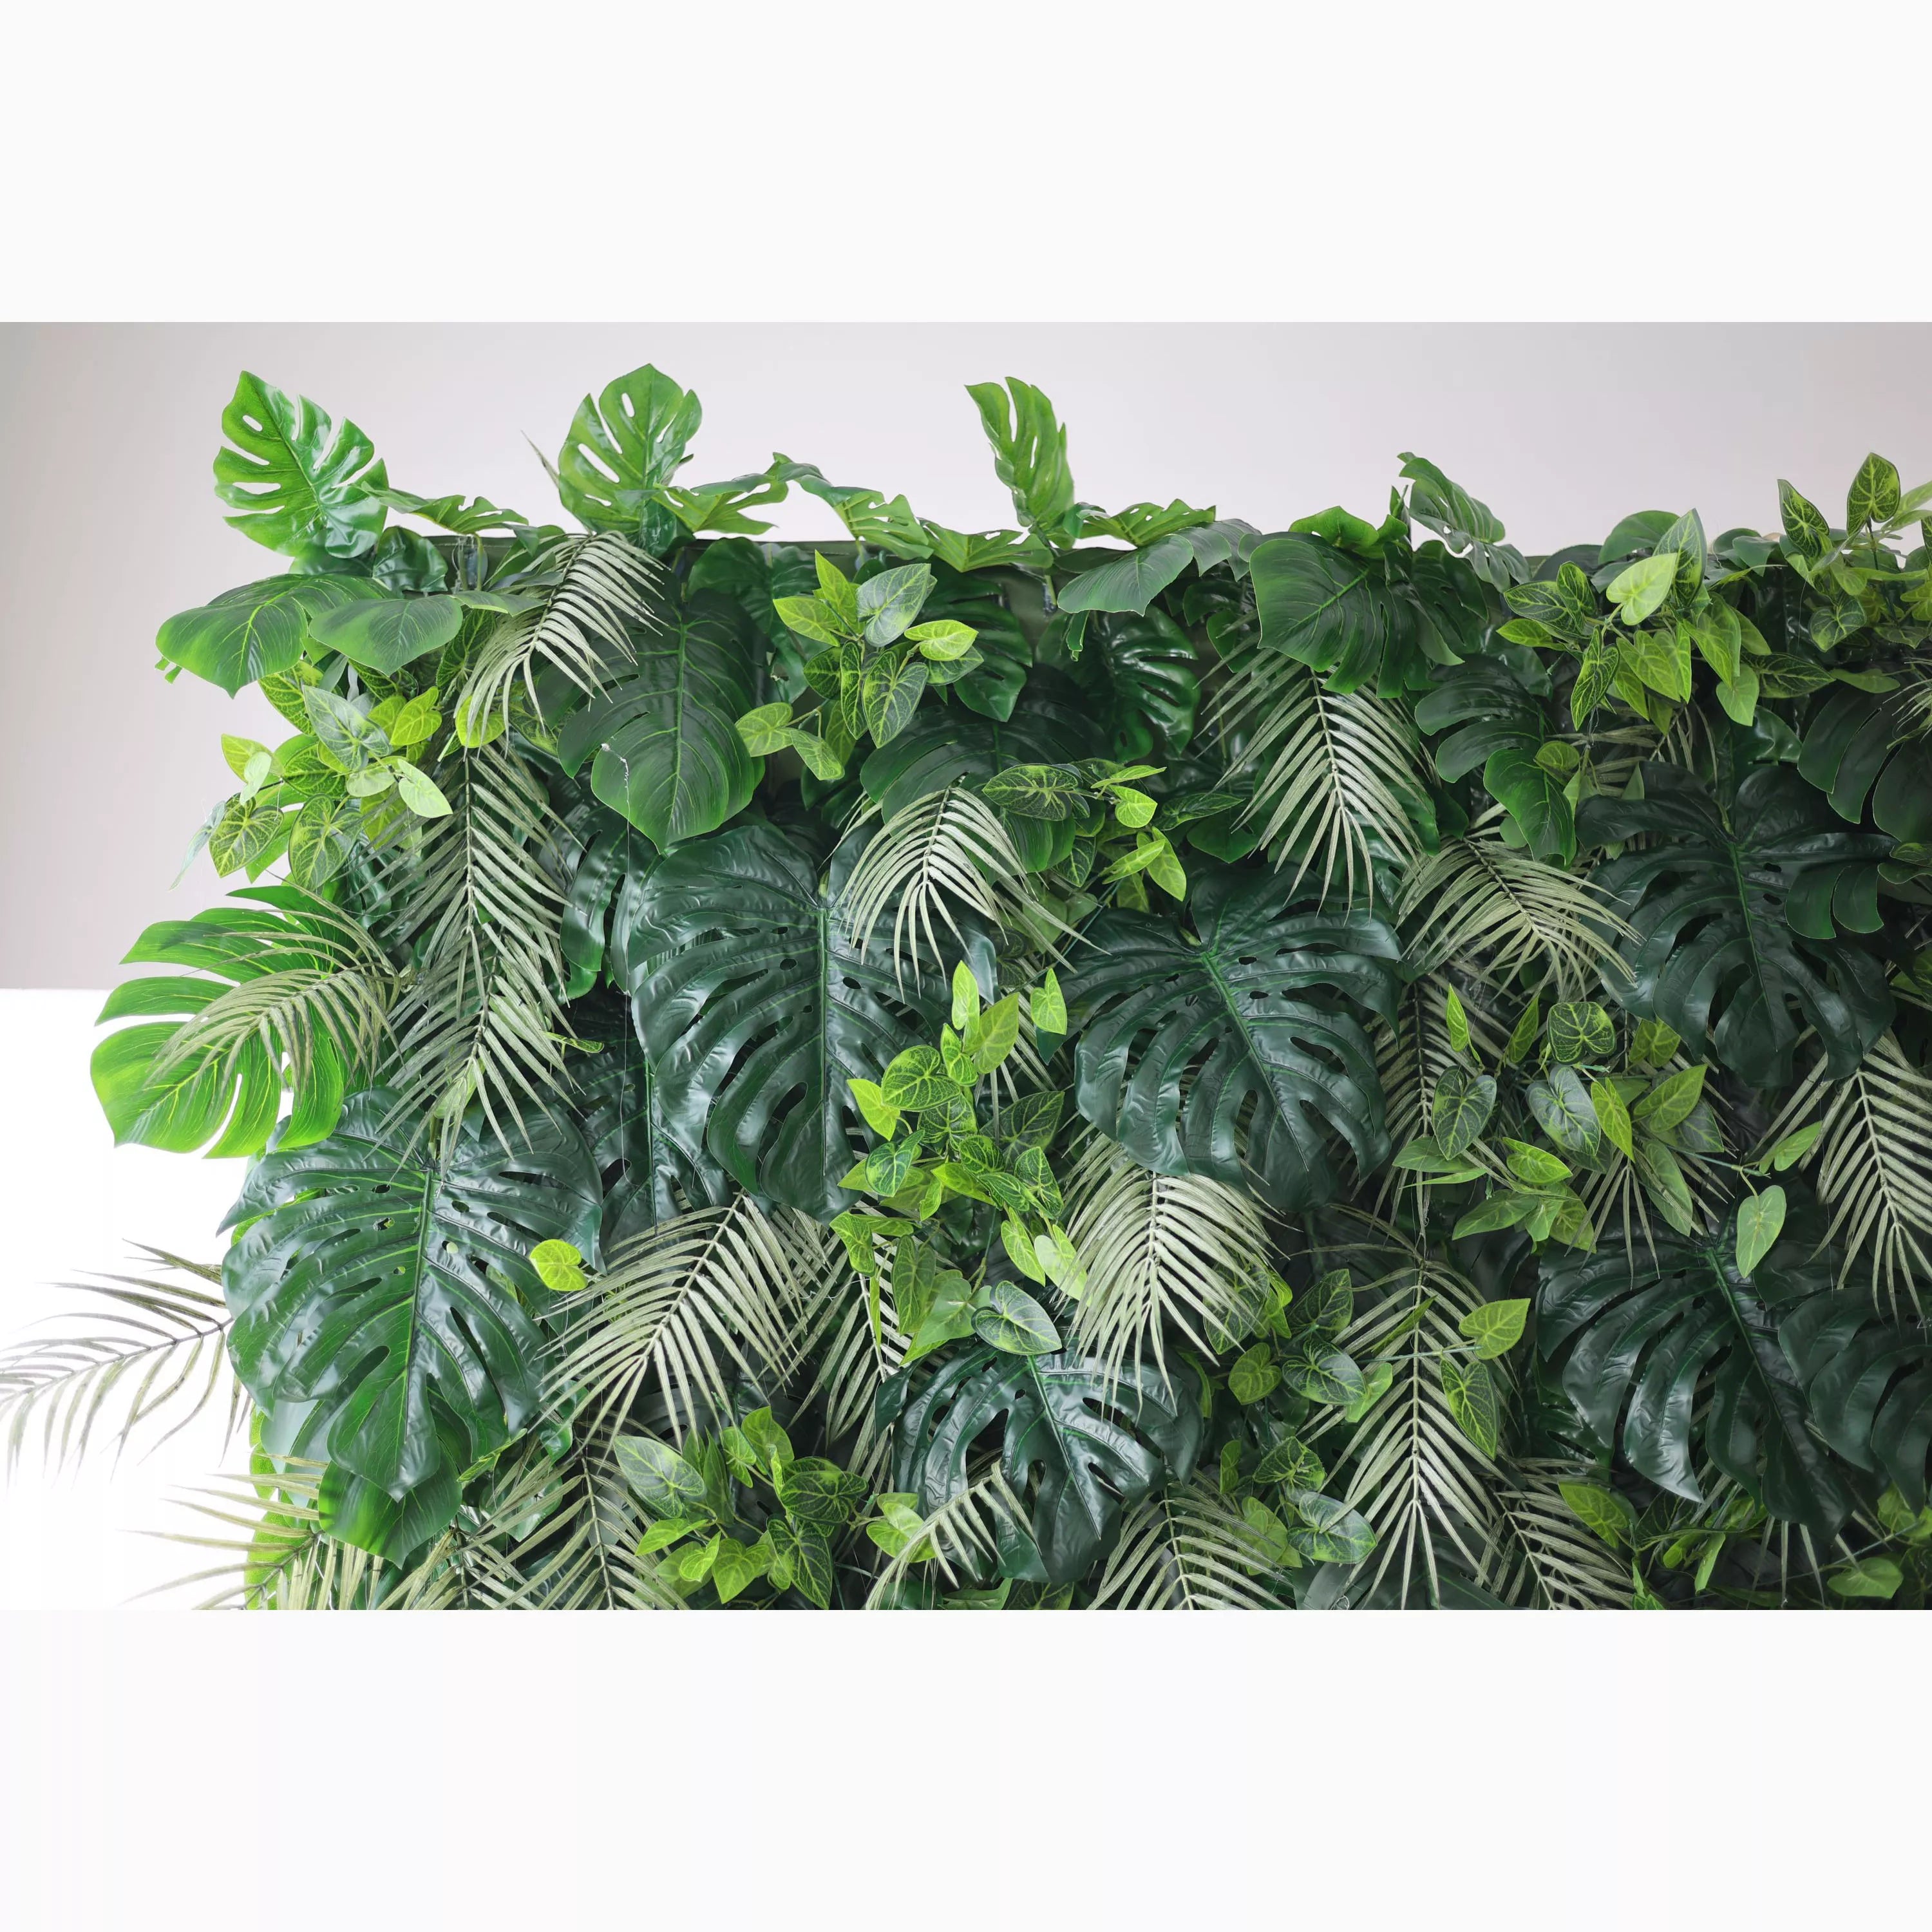 Valar Flowers Presents: Tropical Eden – An Exquisite Artificial Fabric Green Wall-VF-213